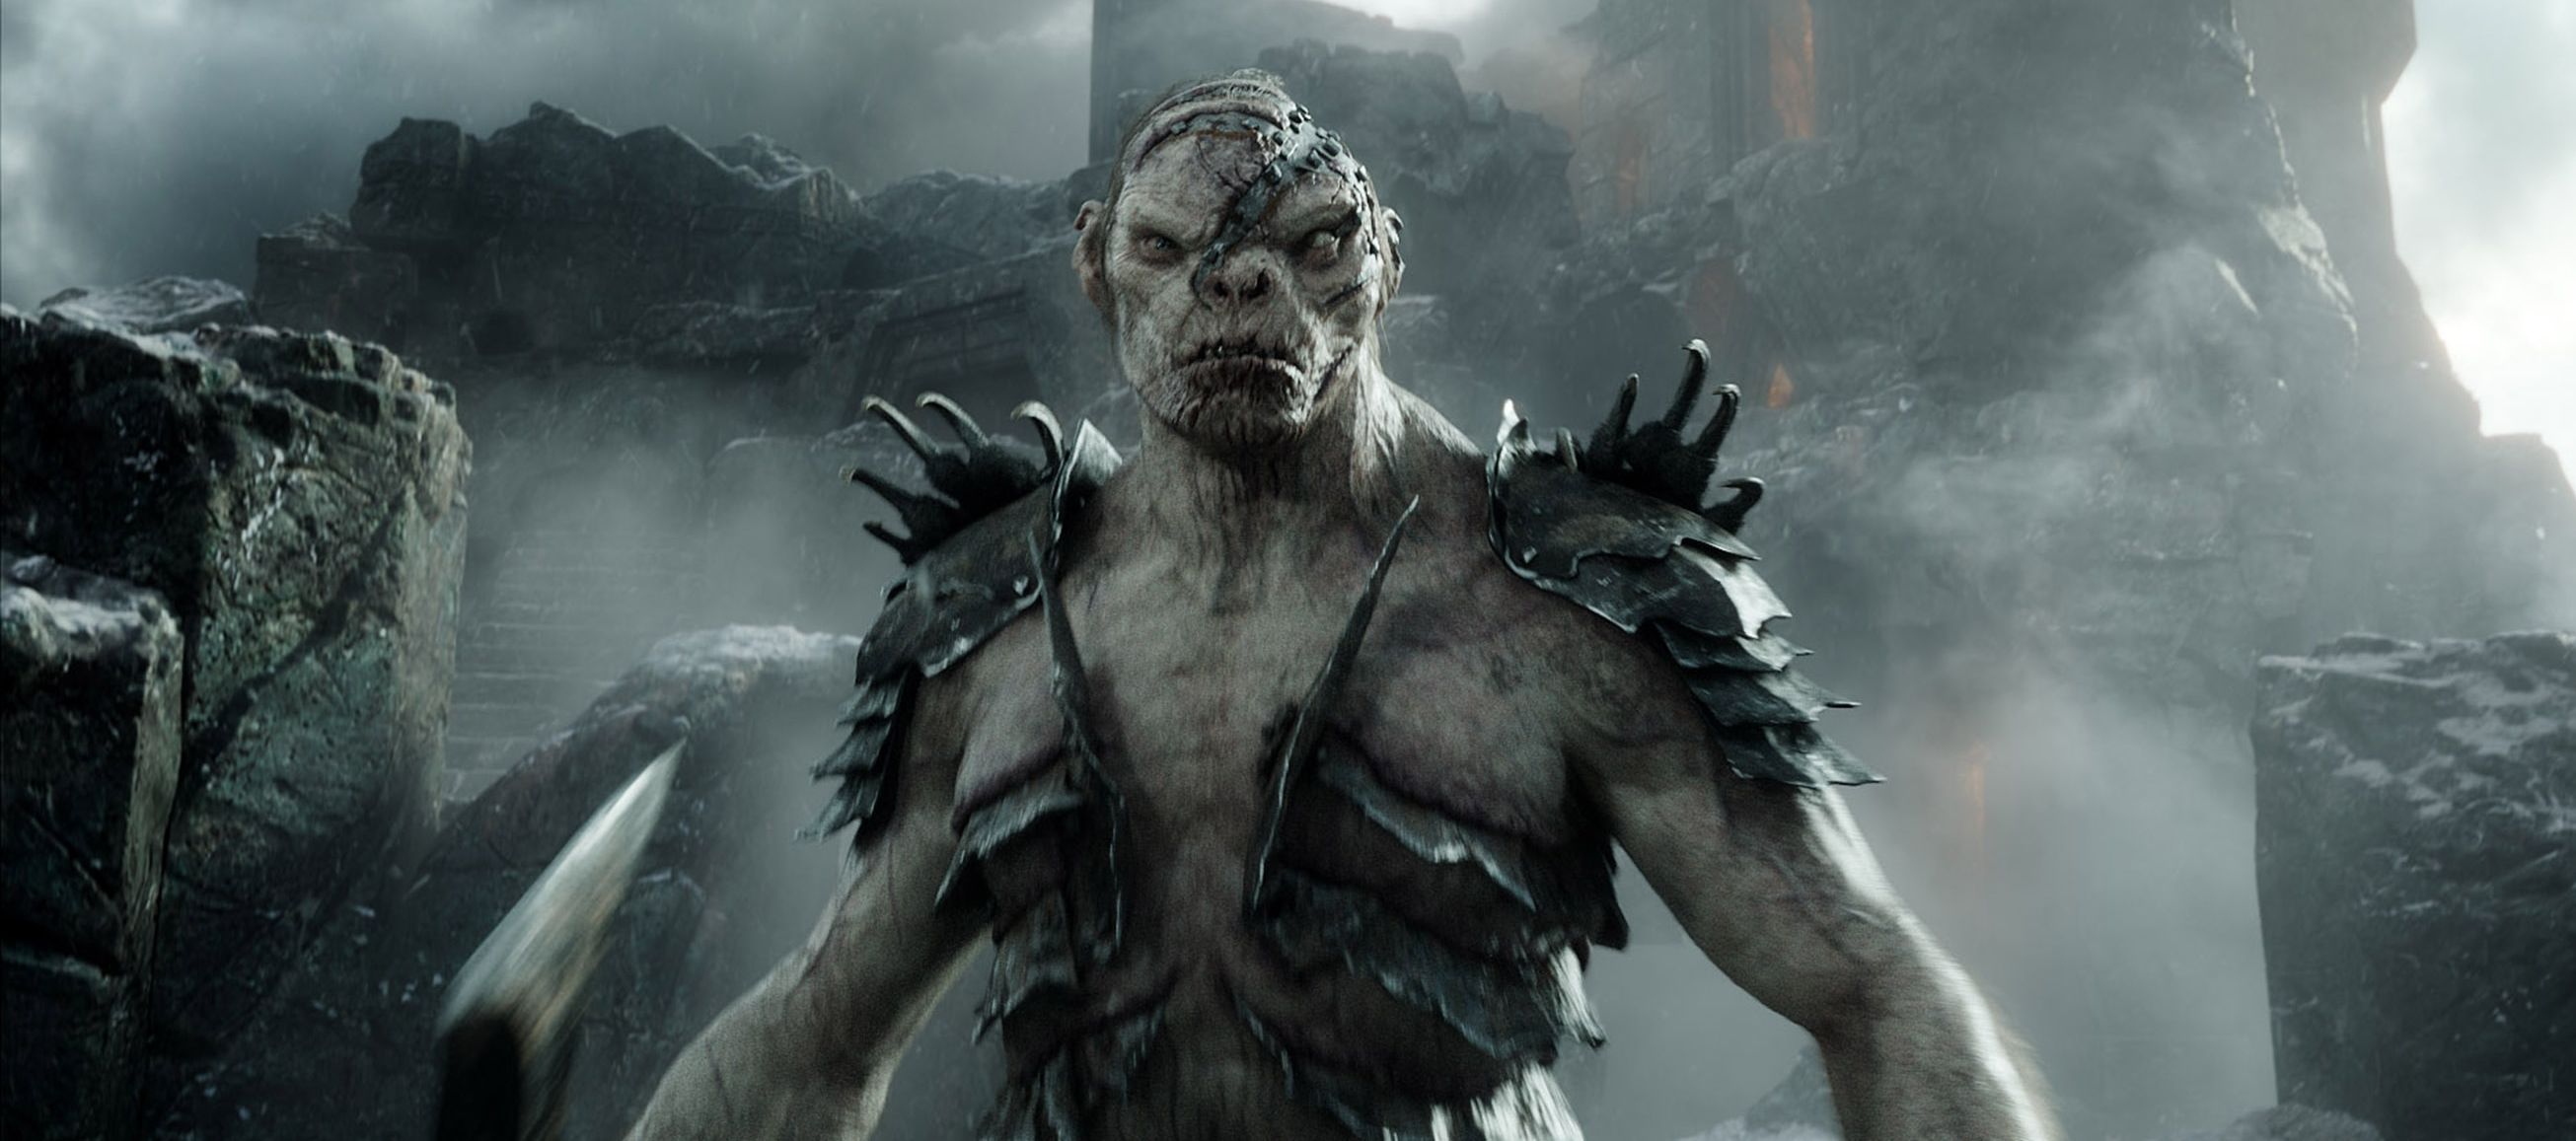 Azog angry in The Battle of the Five Armies